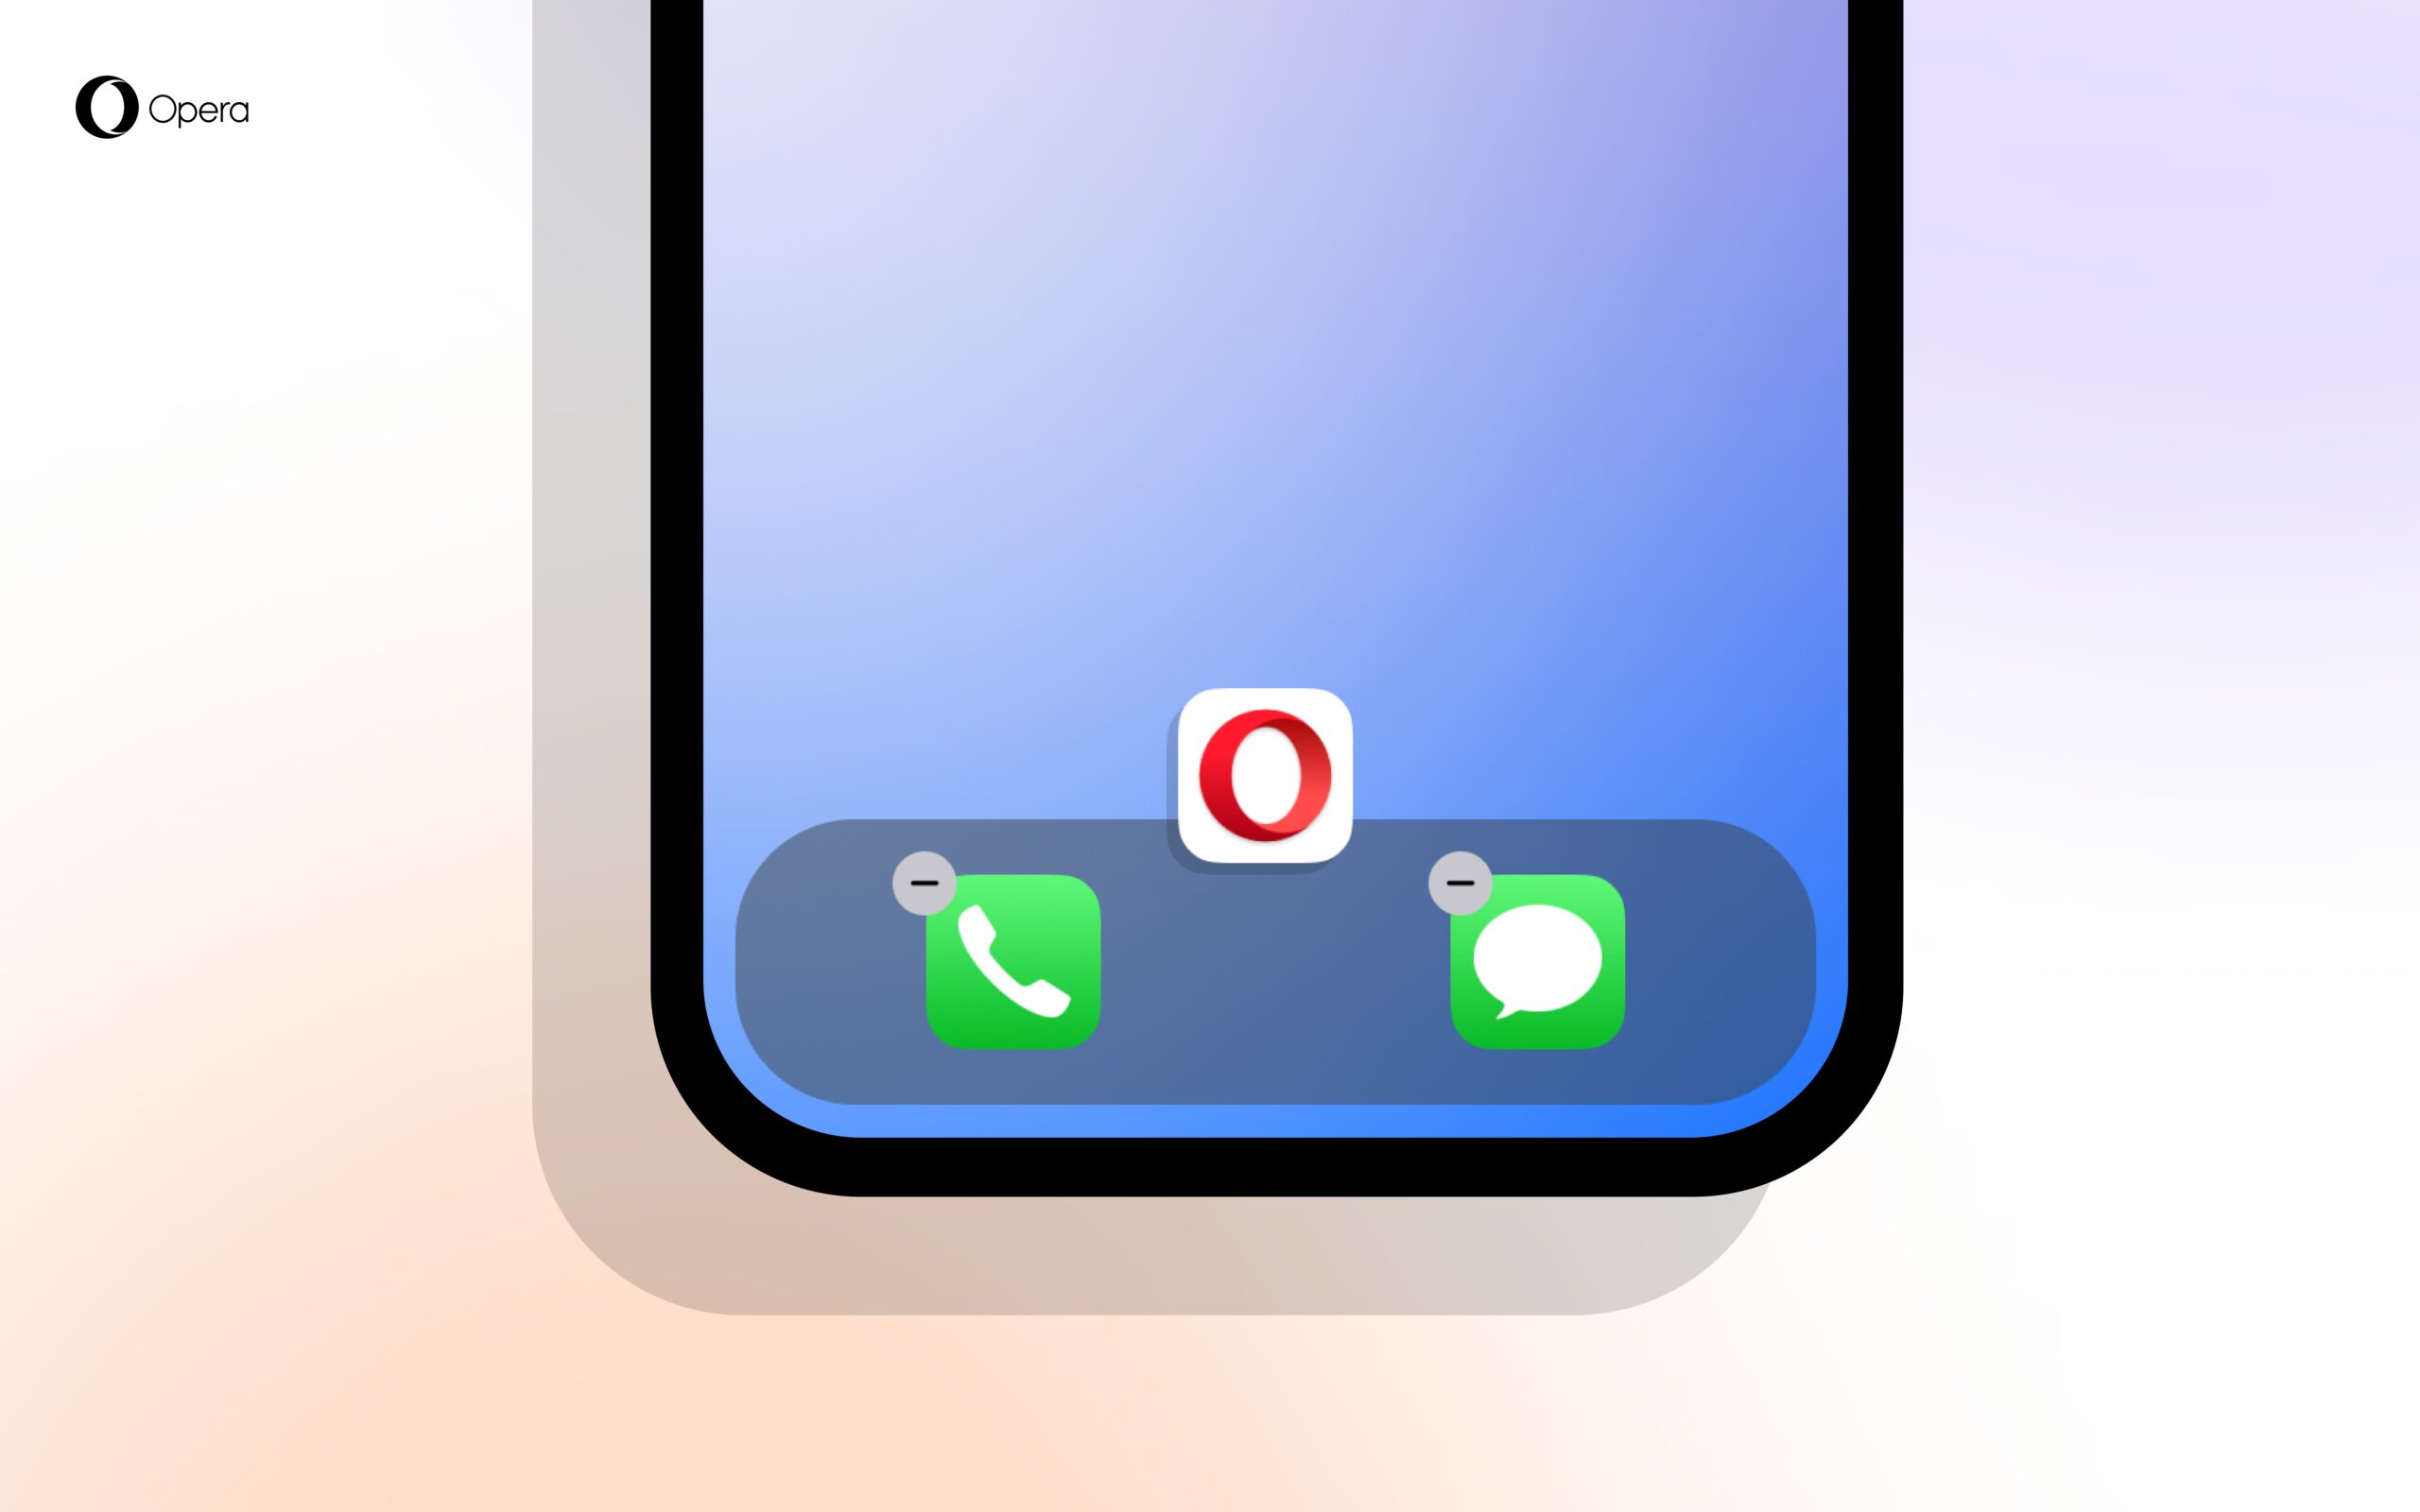 A mobile phone shows Opera becoming the default browser.